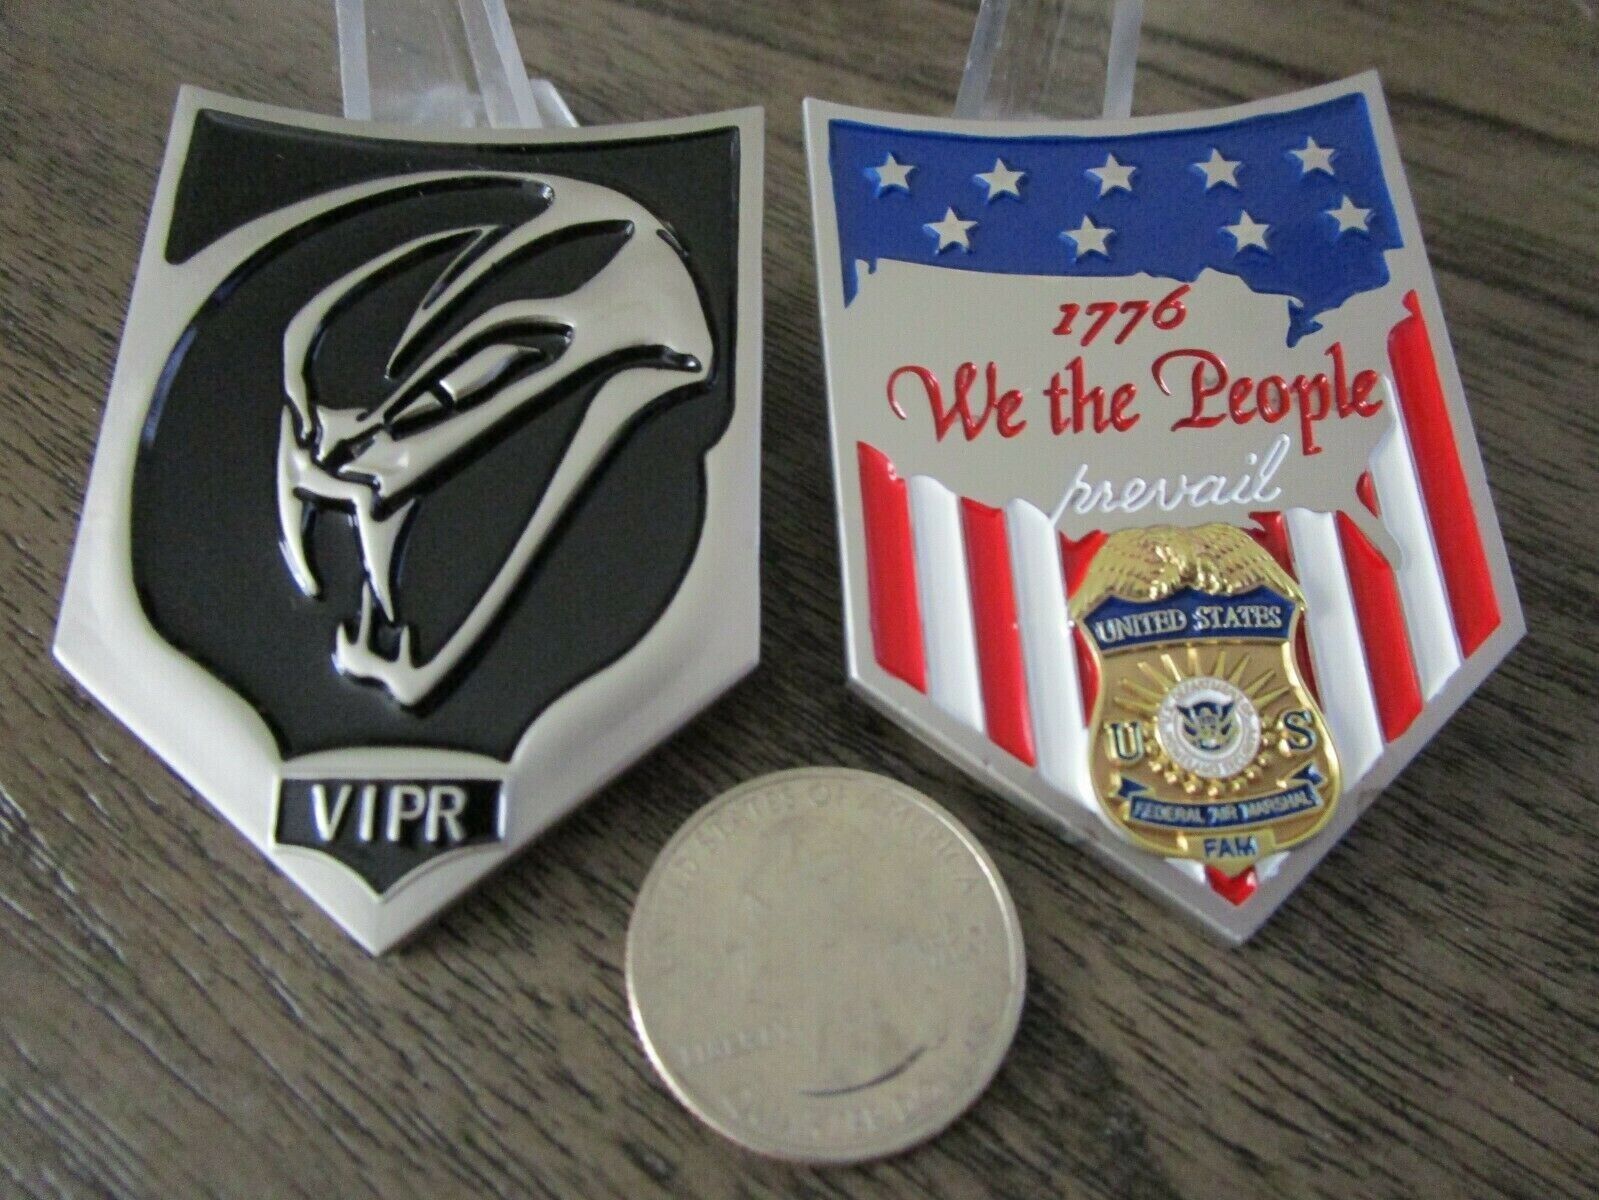 Primary image for Federal Air Marshal VIPR We The People Prevail Challenge Coin